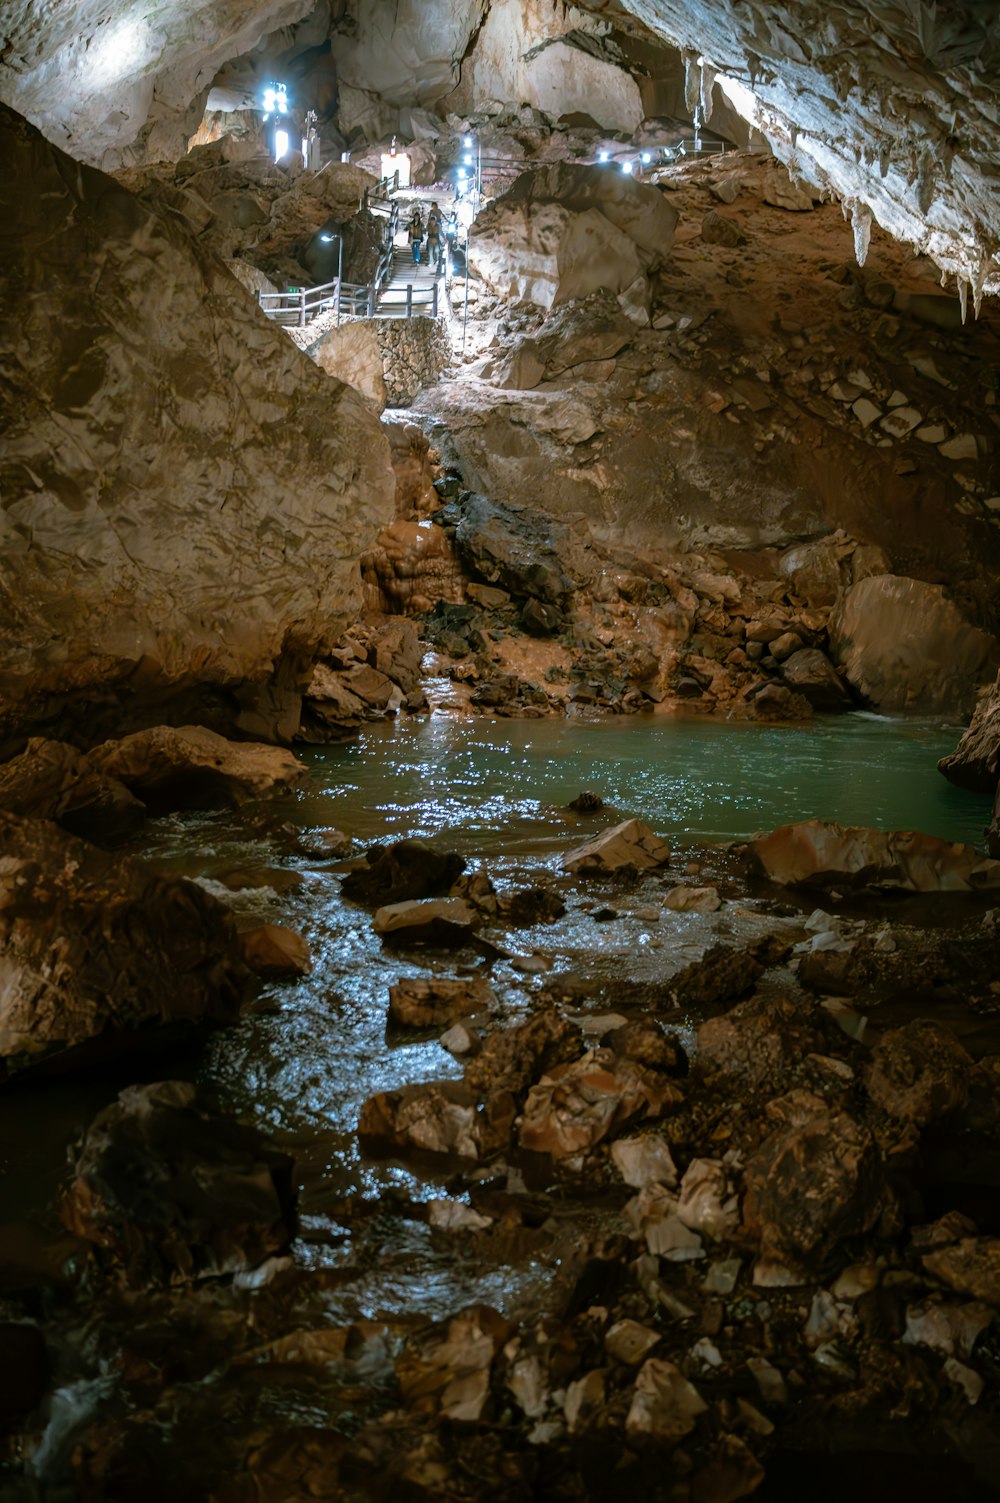 a small stream running through a cave filled with rocks